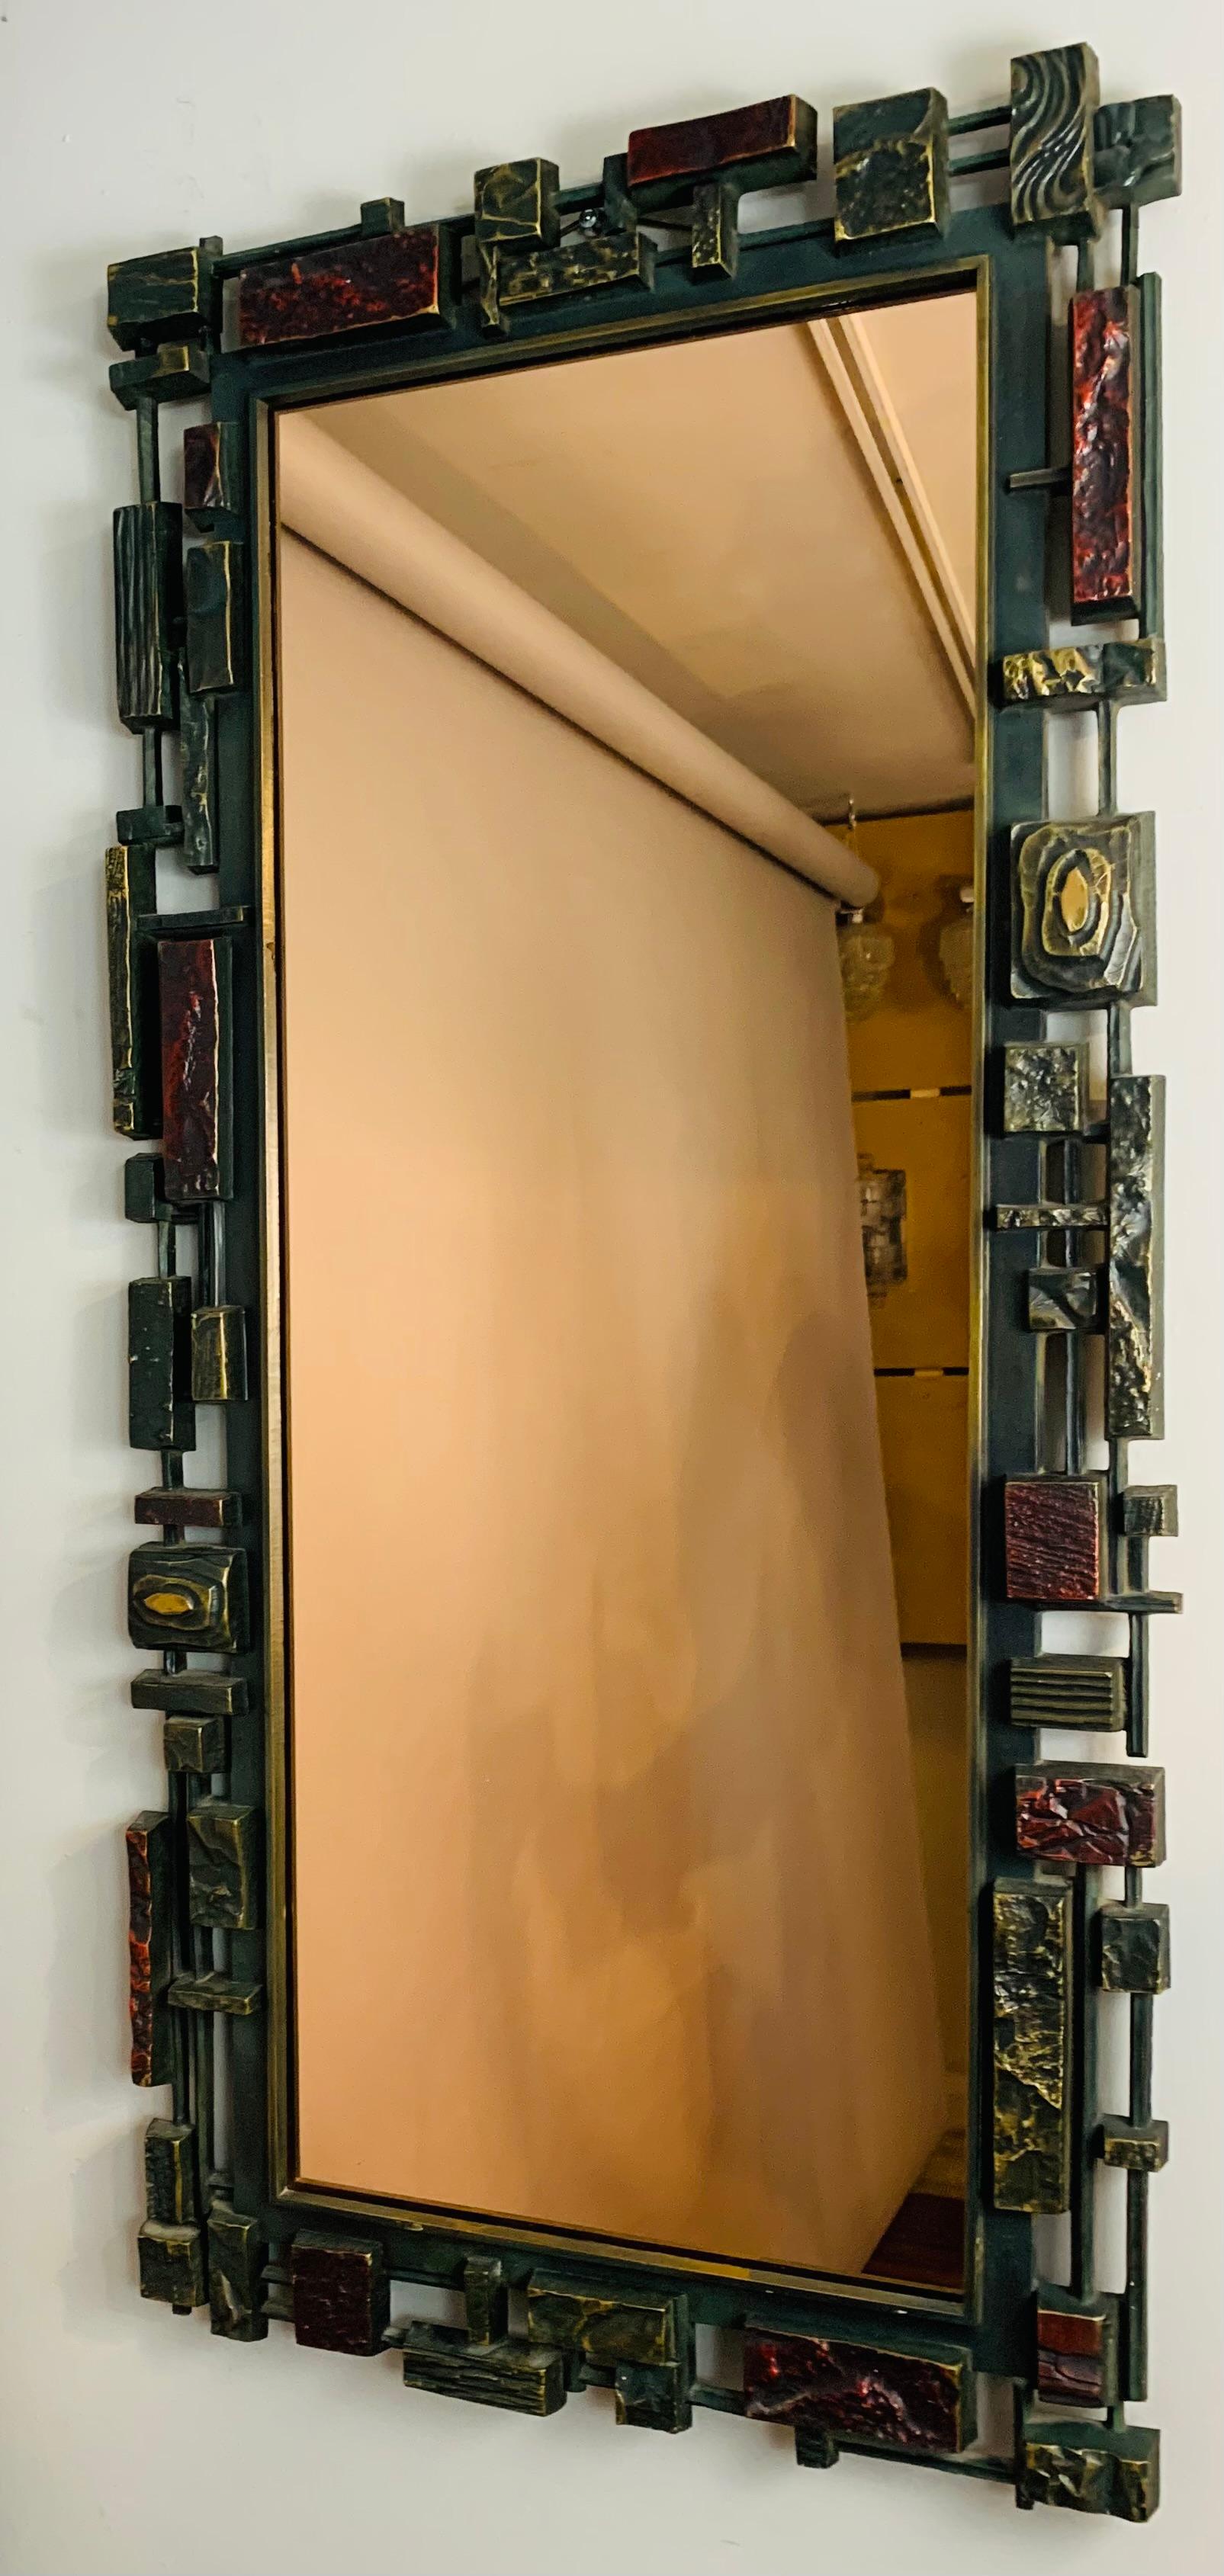 1970s rectangular hanging wall mirror manufactured by Syroco, USA. The unusual, abstract, frame is formed from an injection moulded textured thick resin plastic which is multi-coloured with a metallic finish in vibrant colours of gold and red. The